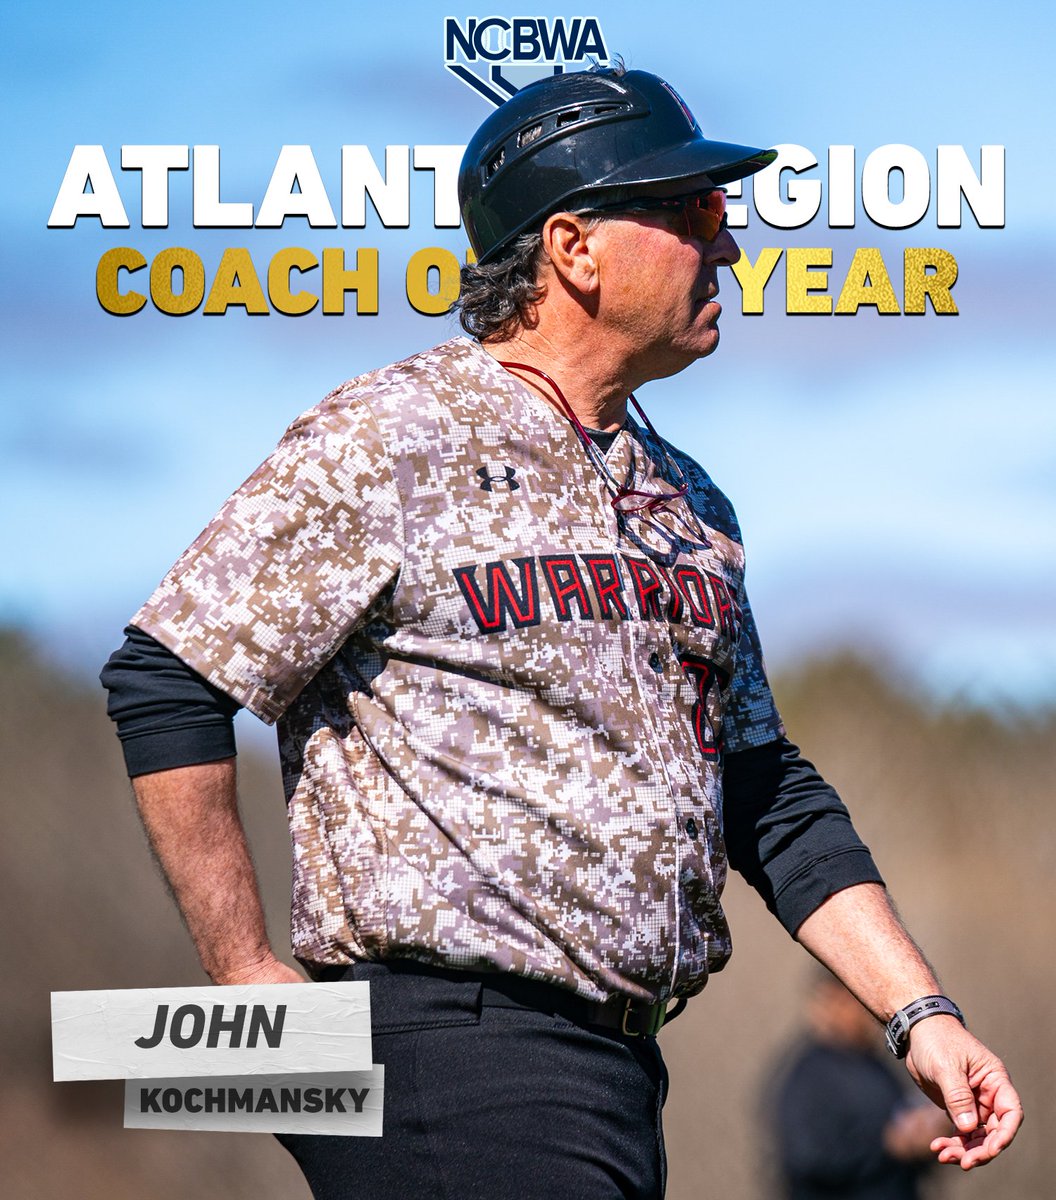 Francisco, Kochmansky Highlight NCBWA All-Atlantic Region Honors

⚔️Brent Francisco became the second straight Warrior to be honored as the NCBWA All-Atlantic Region Pitcher of the Year

⚔️John Kochmansky was tabbed as the NCBWA All-Atlantic Region Coach of the Year for the first